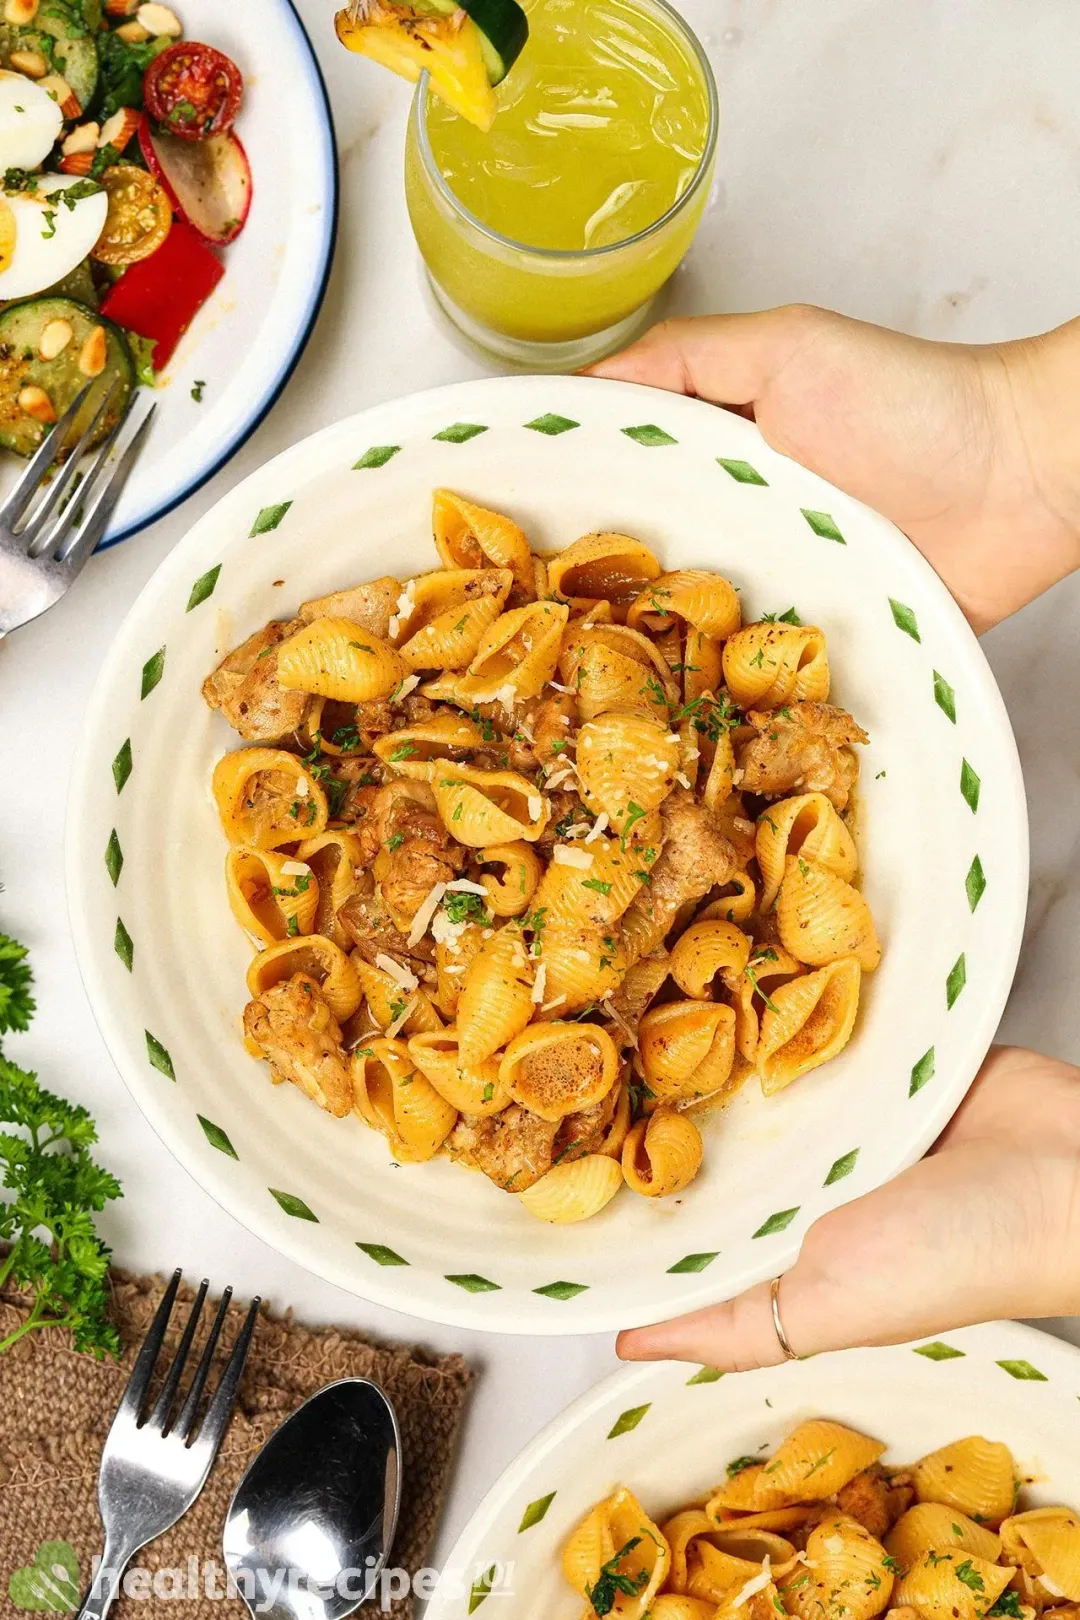 What to Serve With Creamy Cajun Chicken Pasta